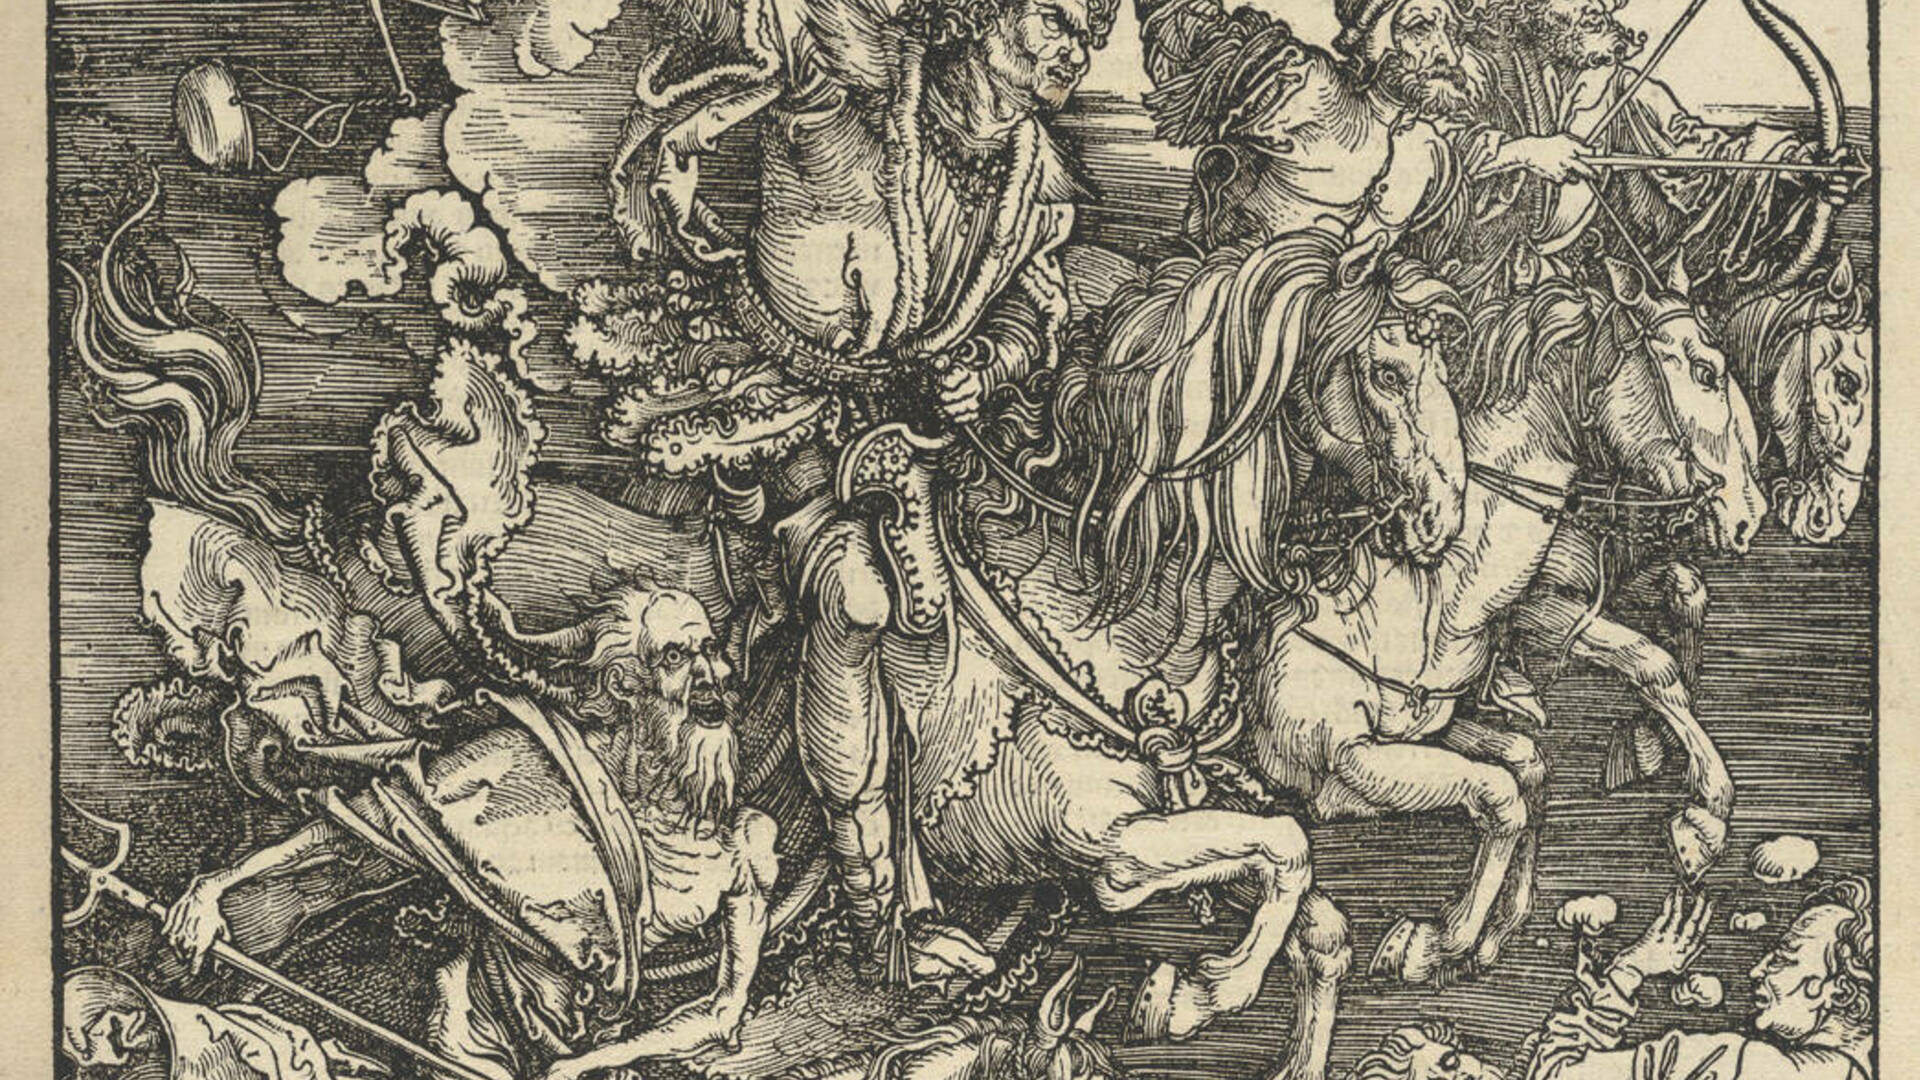 Albrecht Dürer (German 1471–1528), The Four Horsemen of the Apocalypse, 1511, woodcut. Acquired with funds provided by the estate of Edith and Dr. Paul J. Vignos Jr. ’41, 2013.013.005